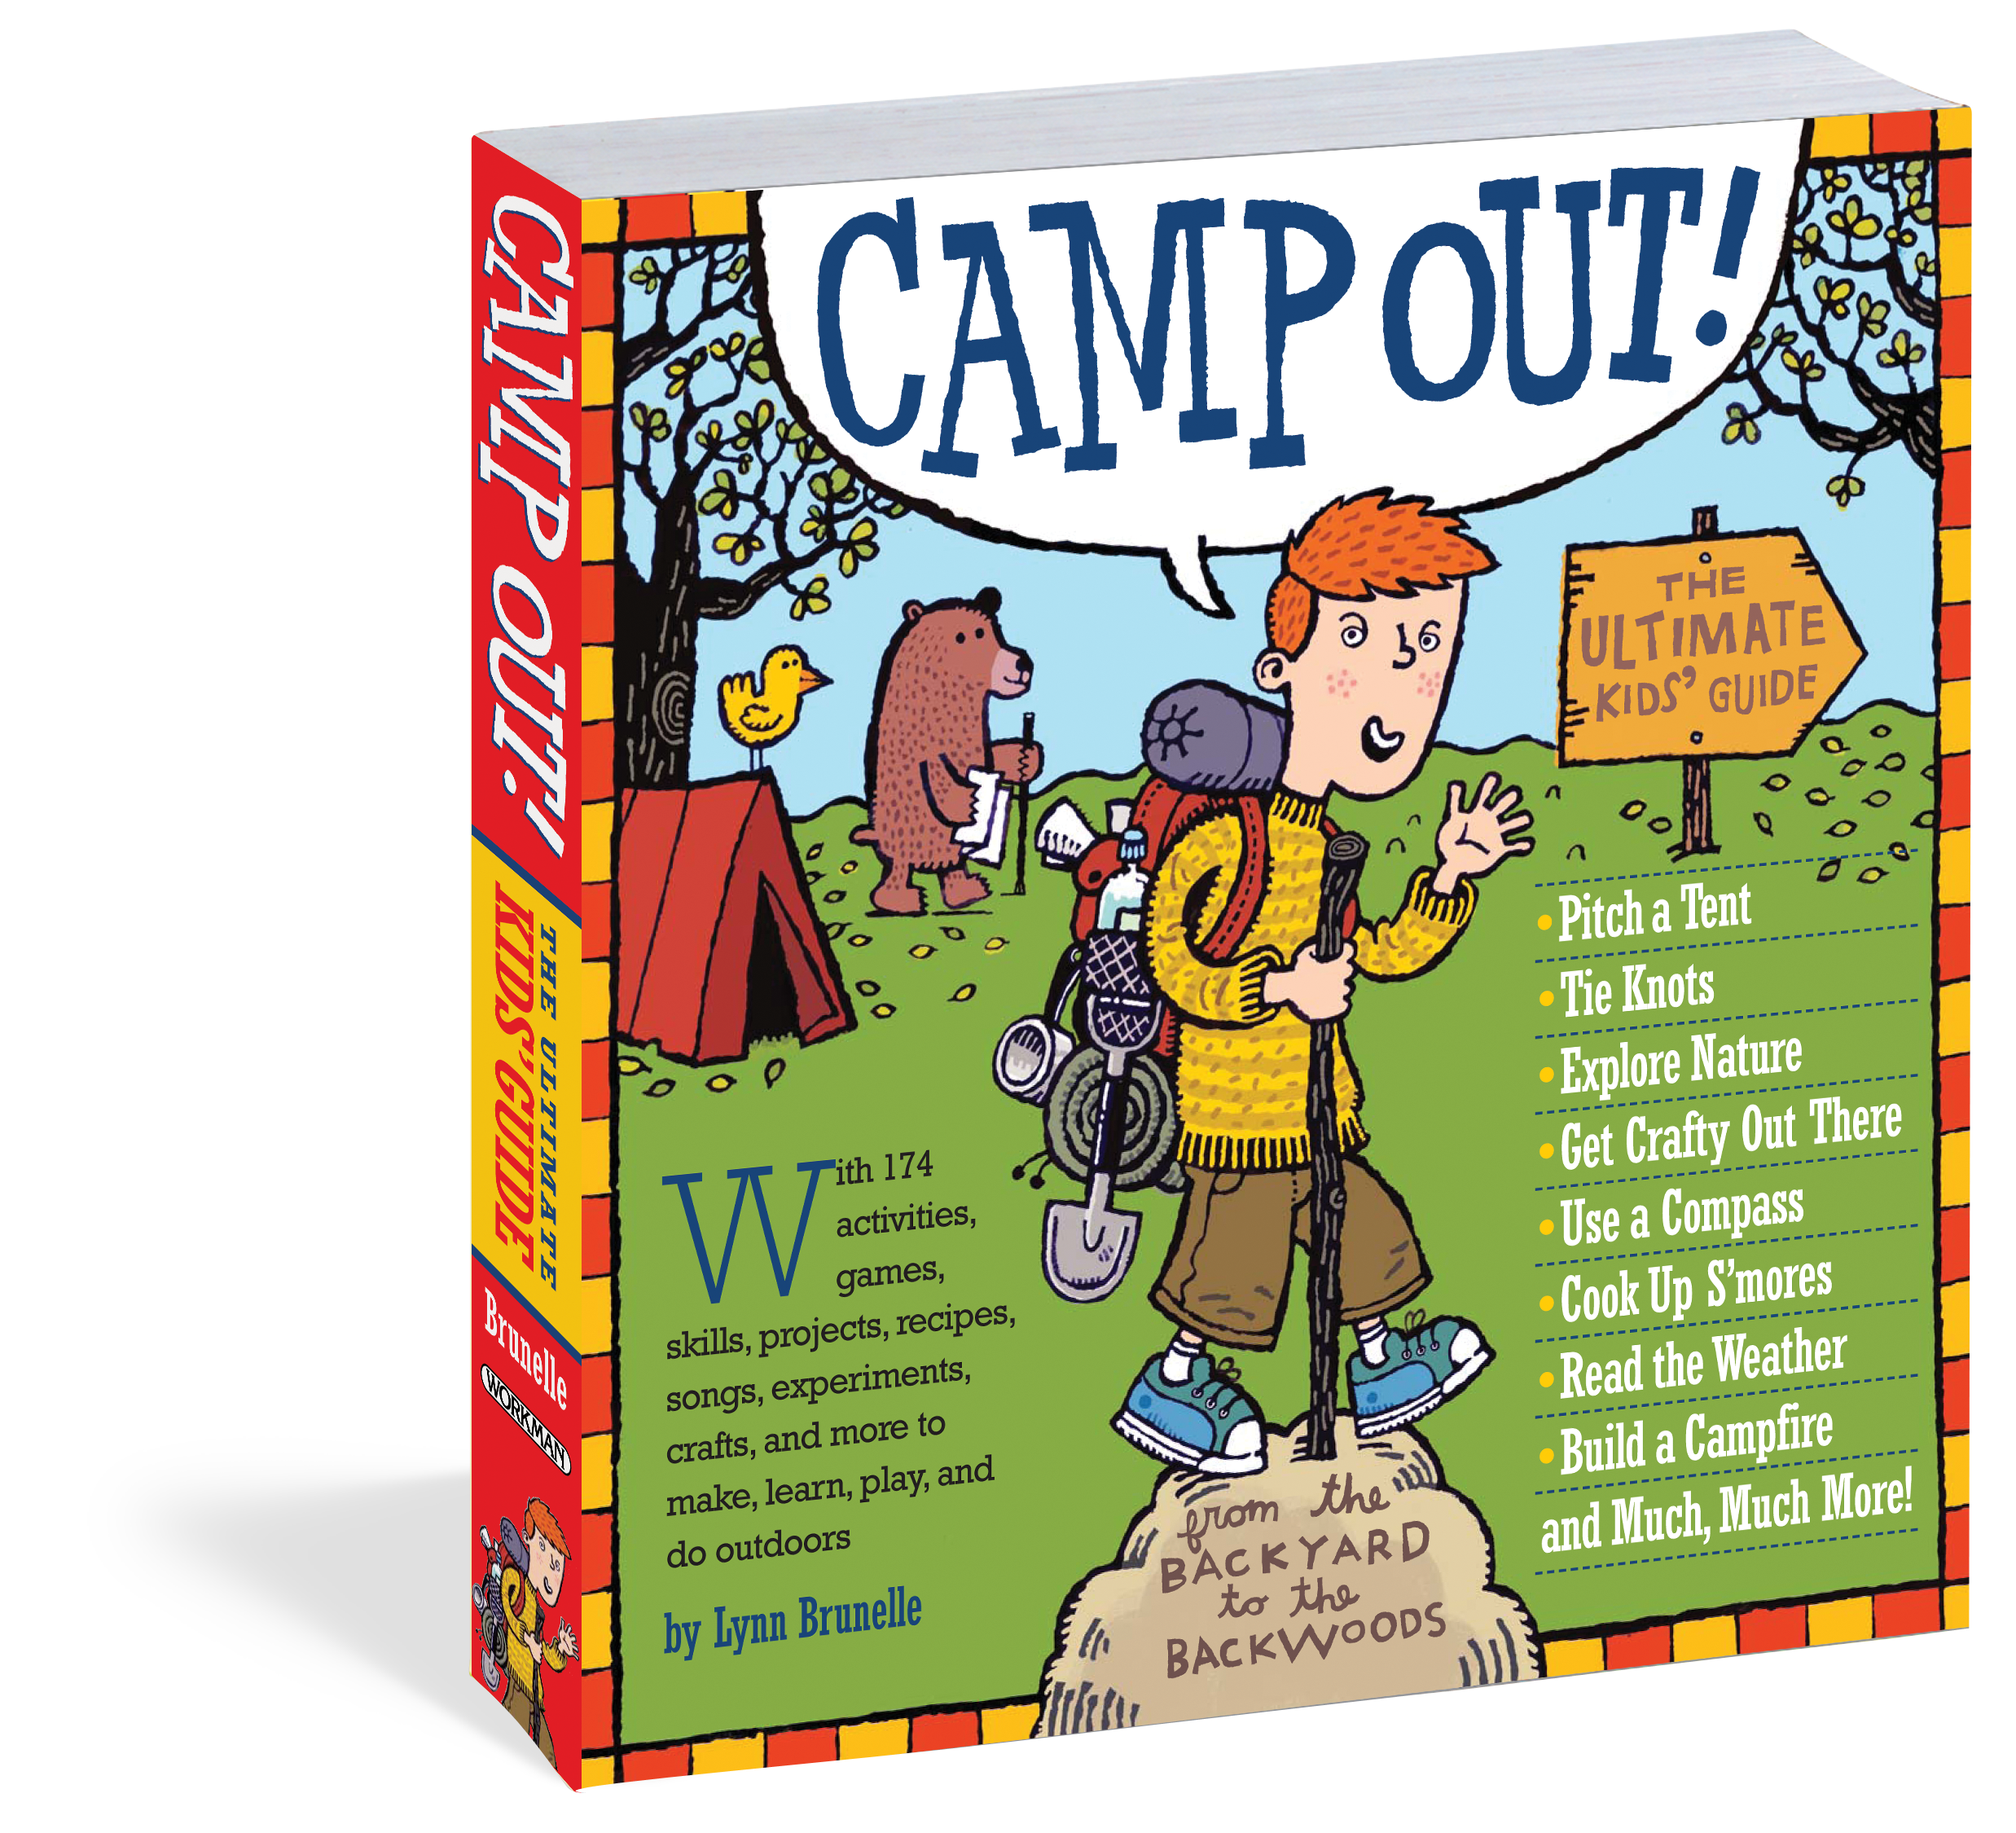 Camp Out! - The Ultimate Kids Guide    